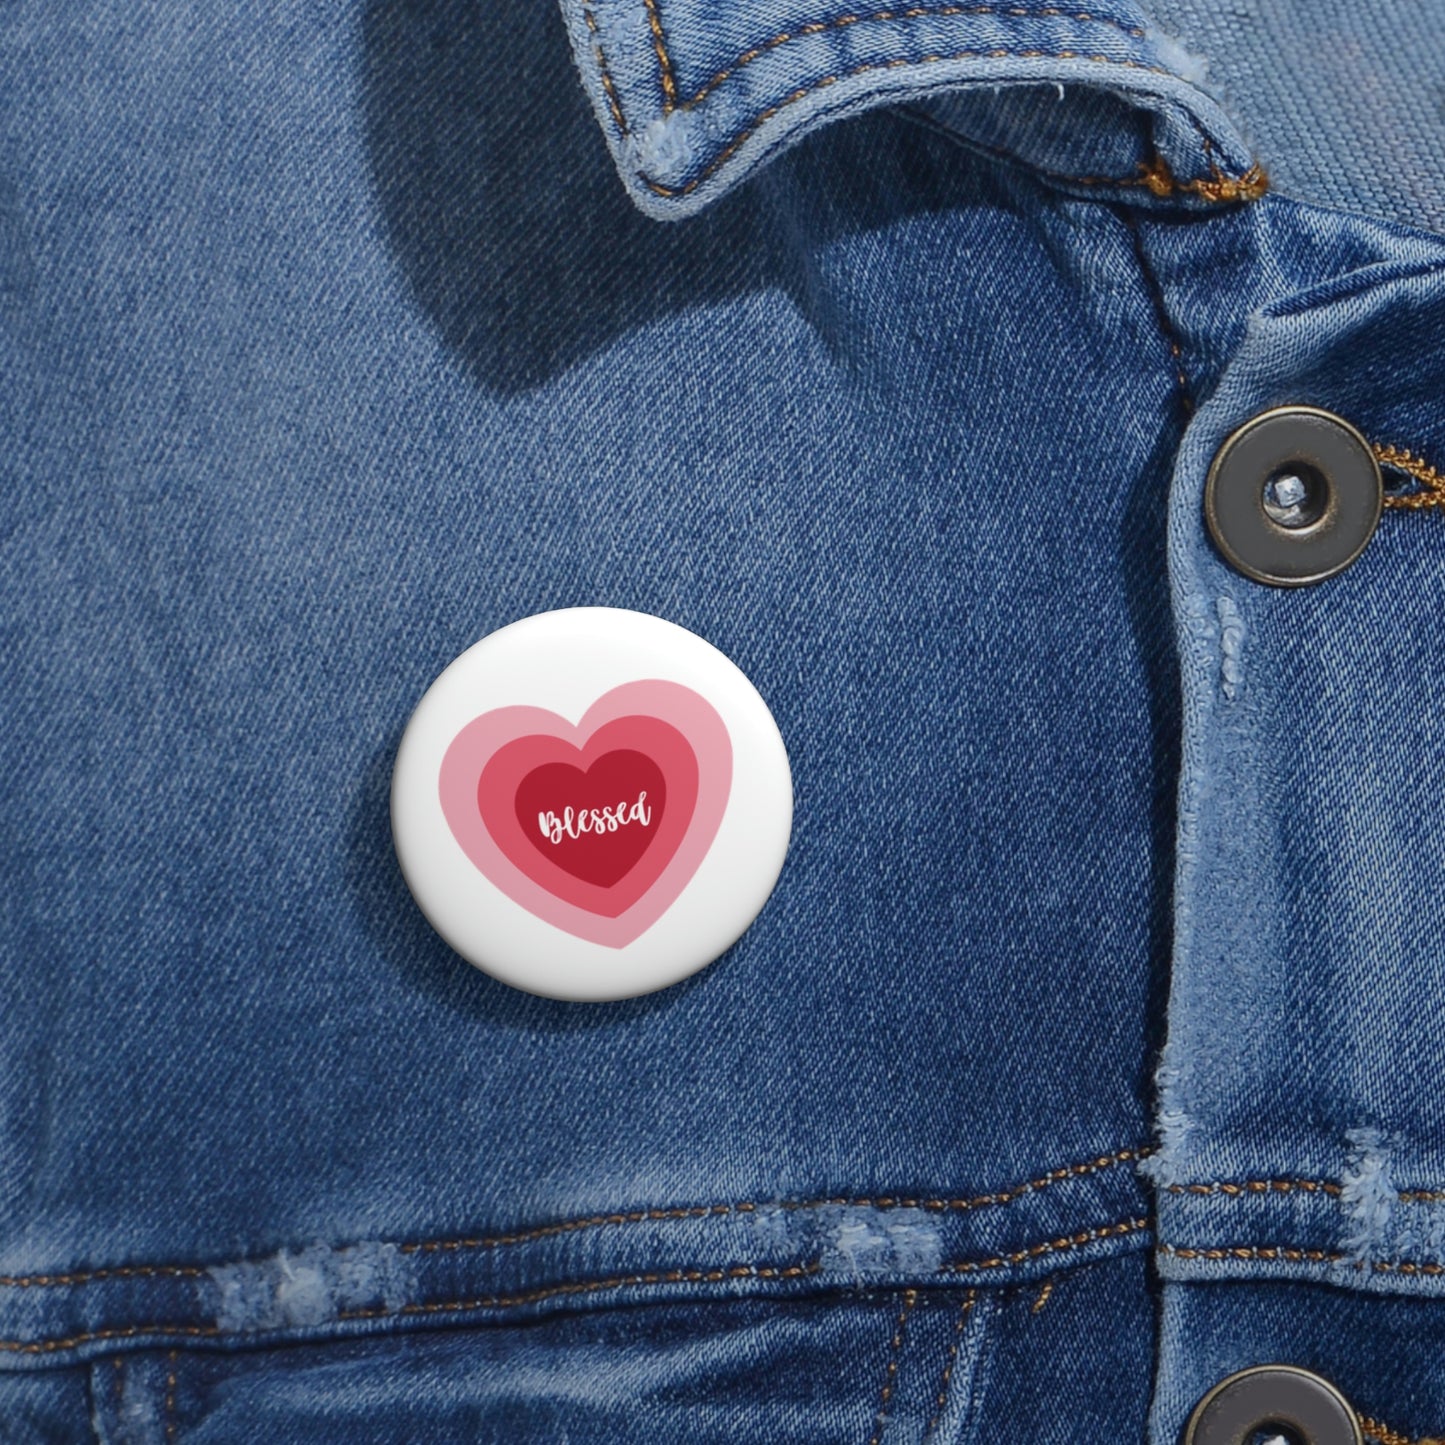 Blessed Heart Pin Button